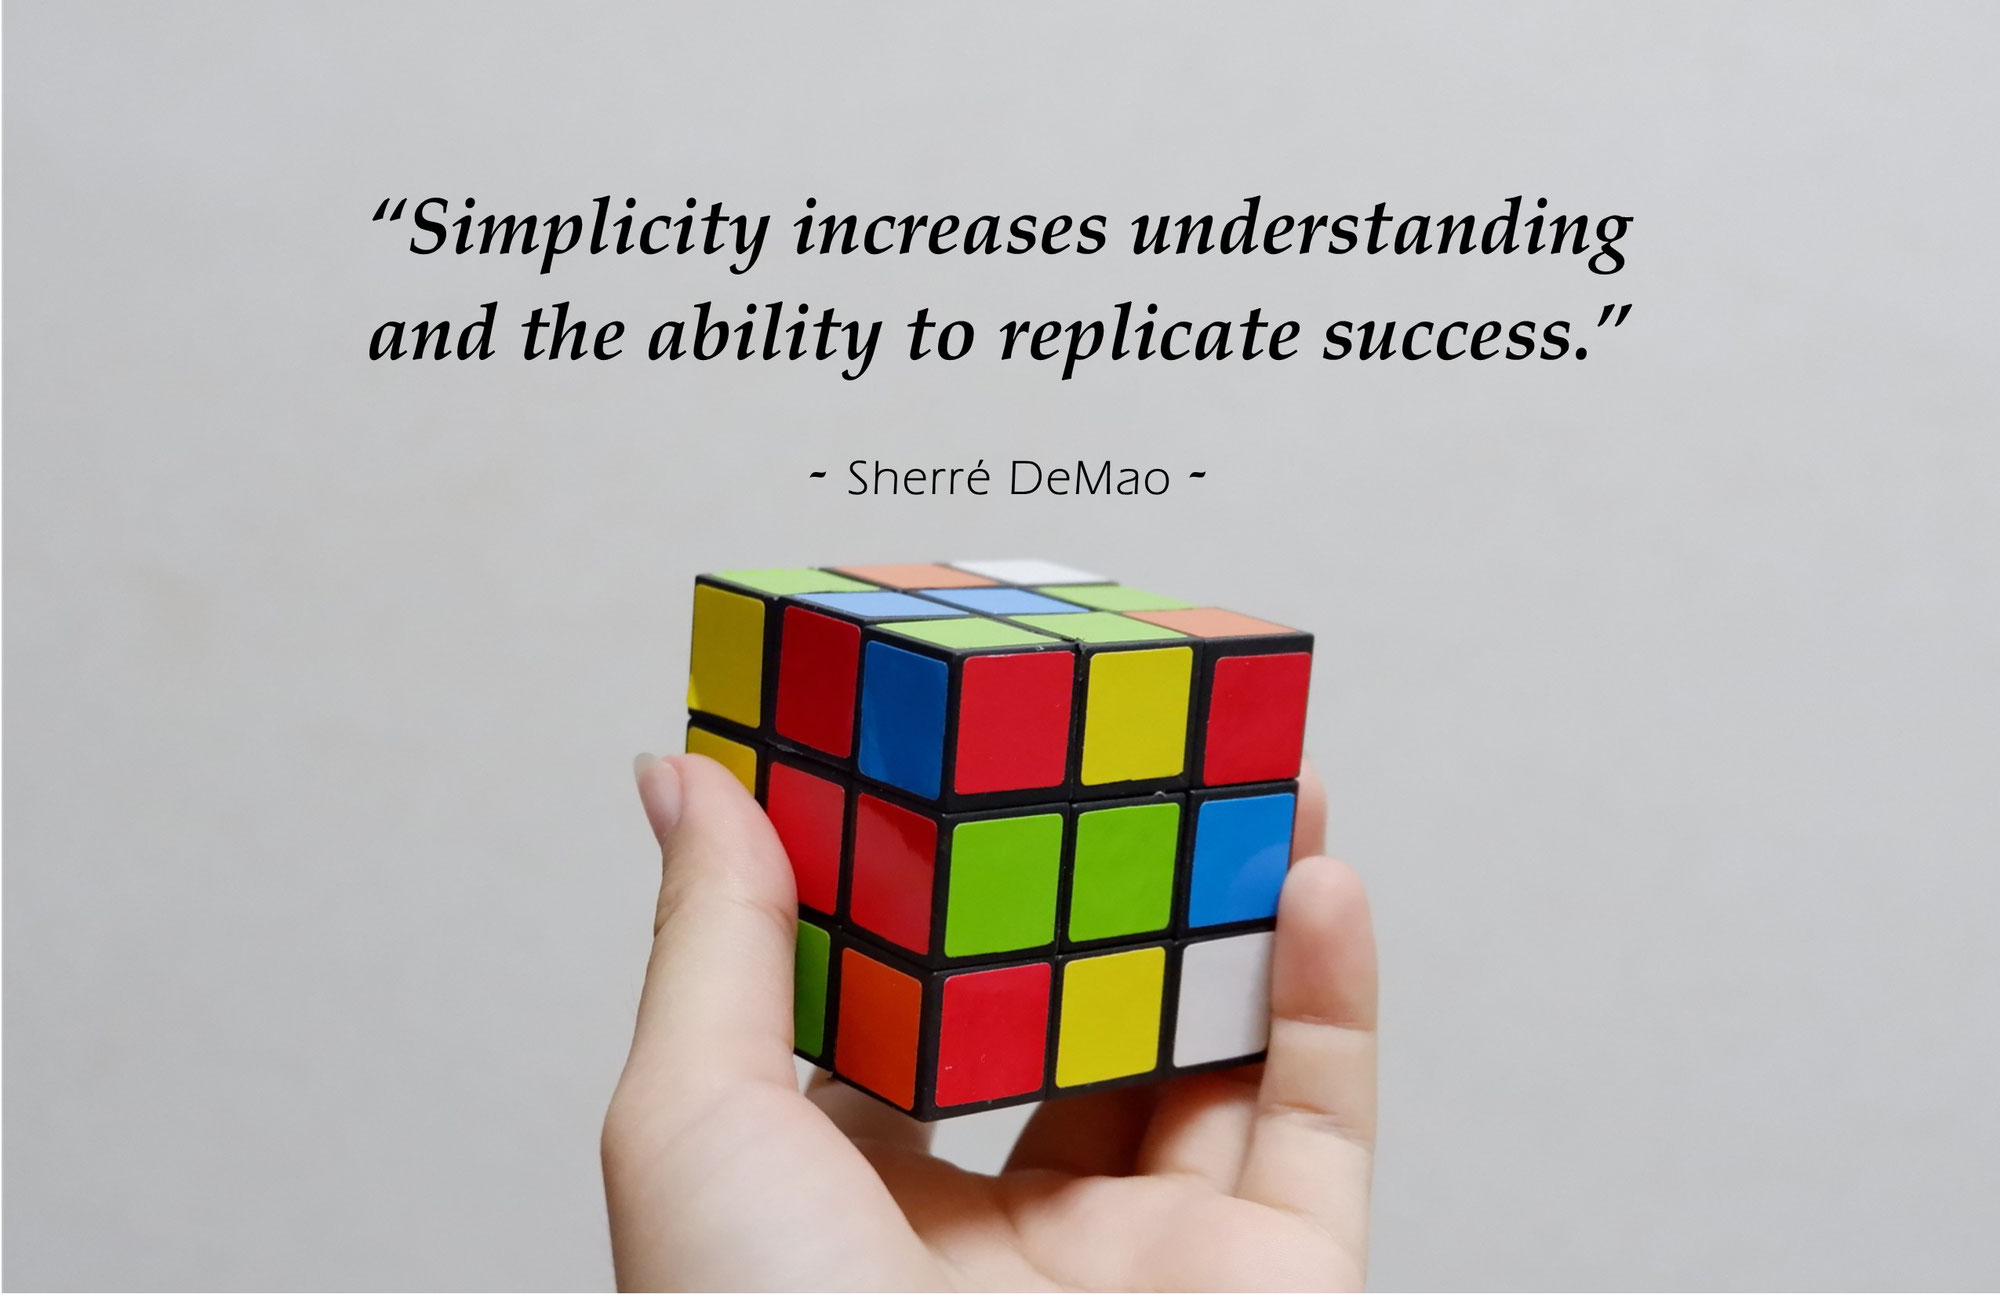 Could simplification be the key?